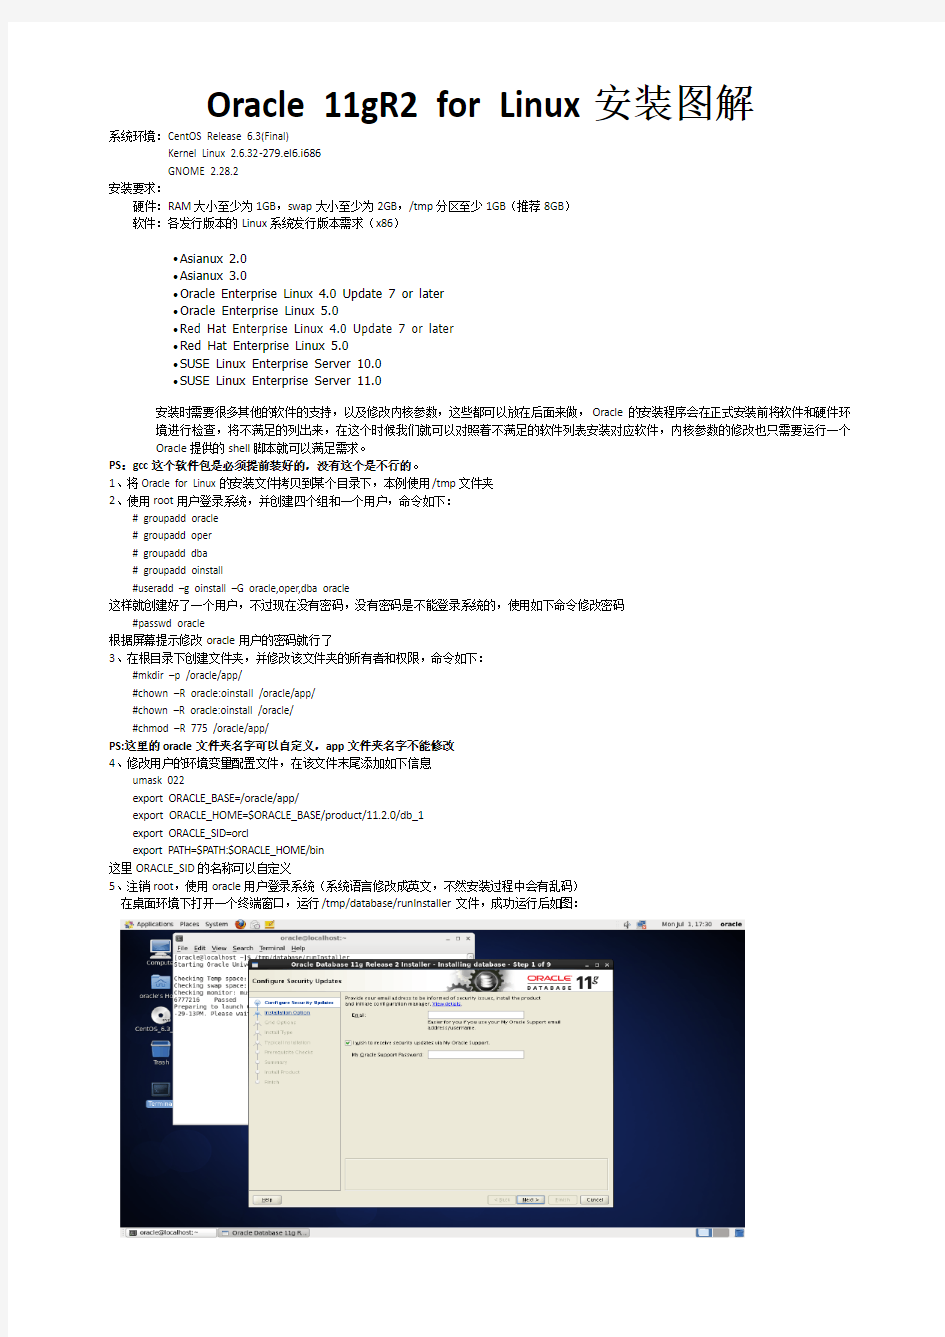 Oracle 11gR2 for Linux安装图解